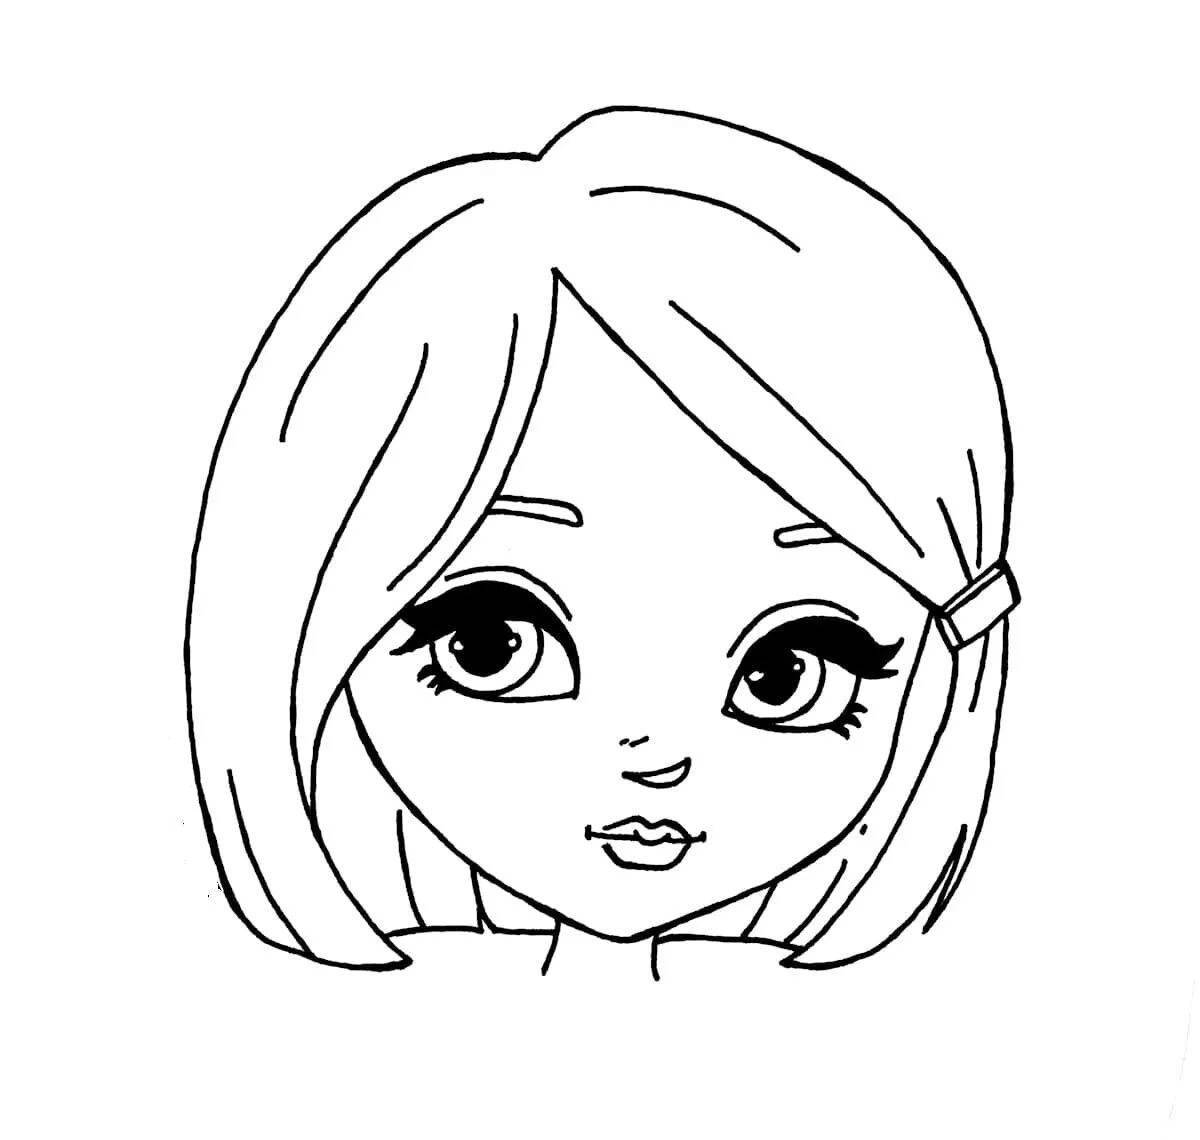 Adorable easy coloring pages for girls 10 years old